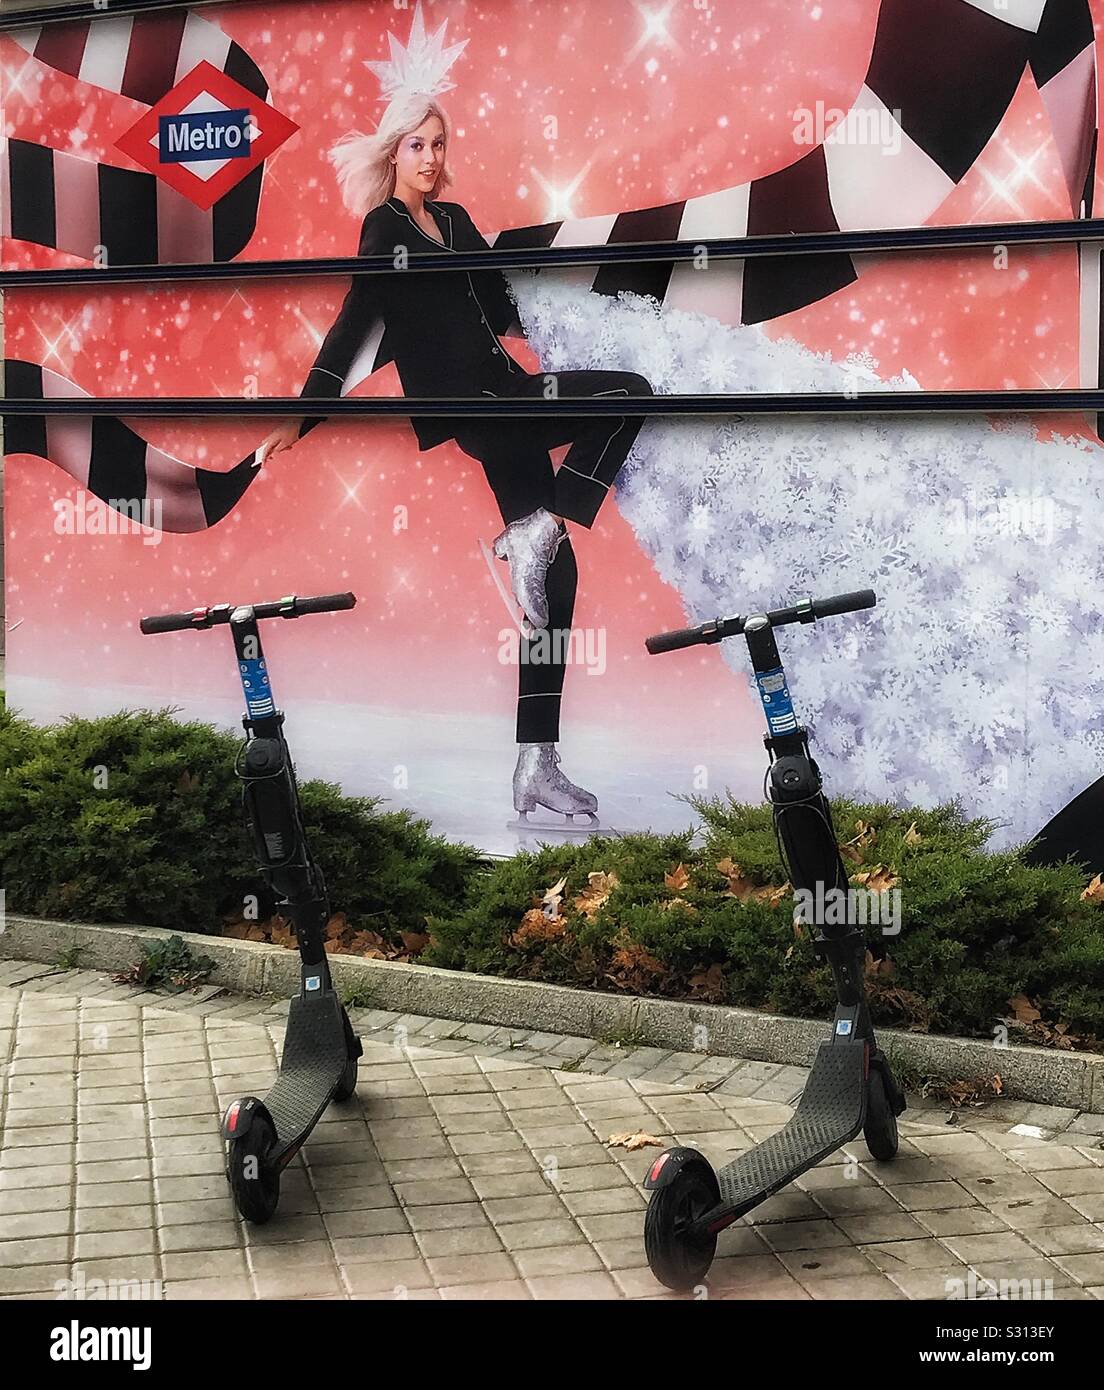 Two electric scooters available for hire parked in the pavement in front of a wall near a metro station, the wall being painted with a mural design Stock Photo